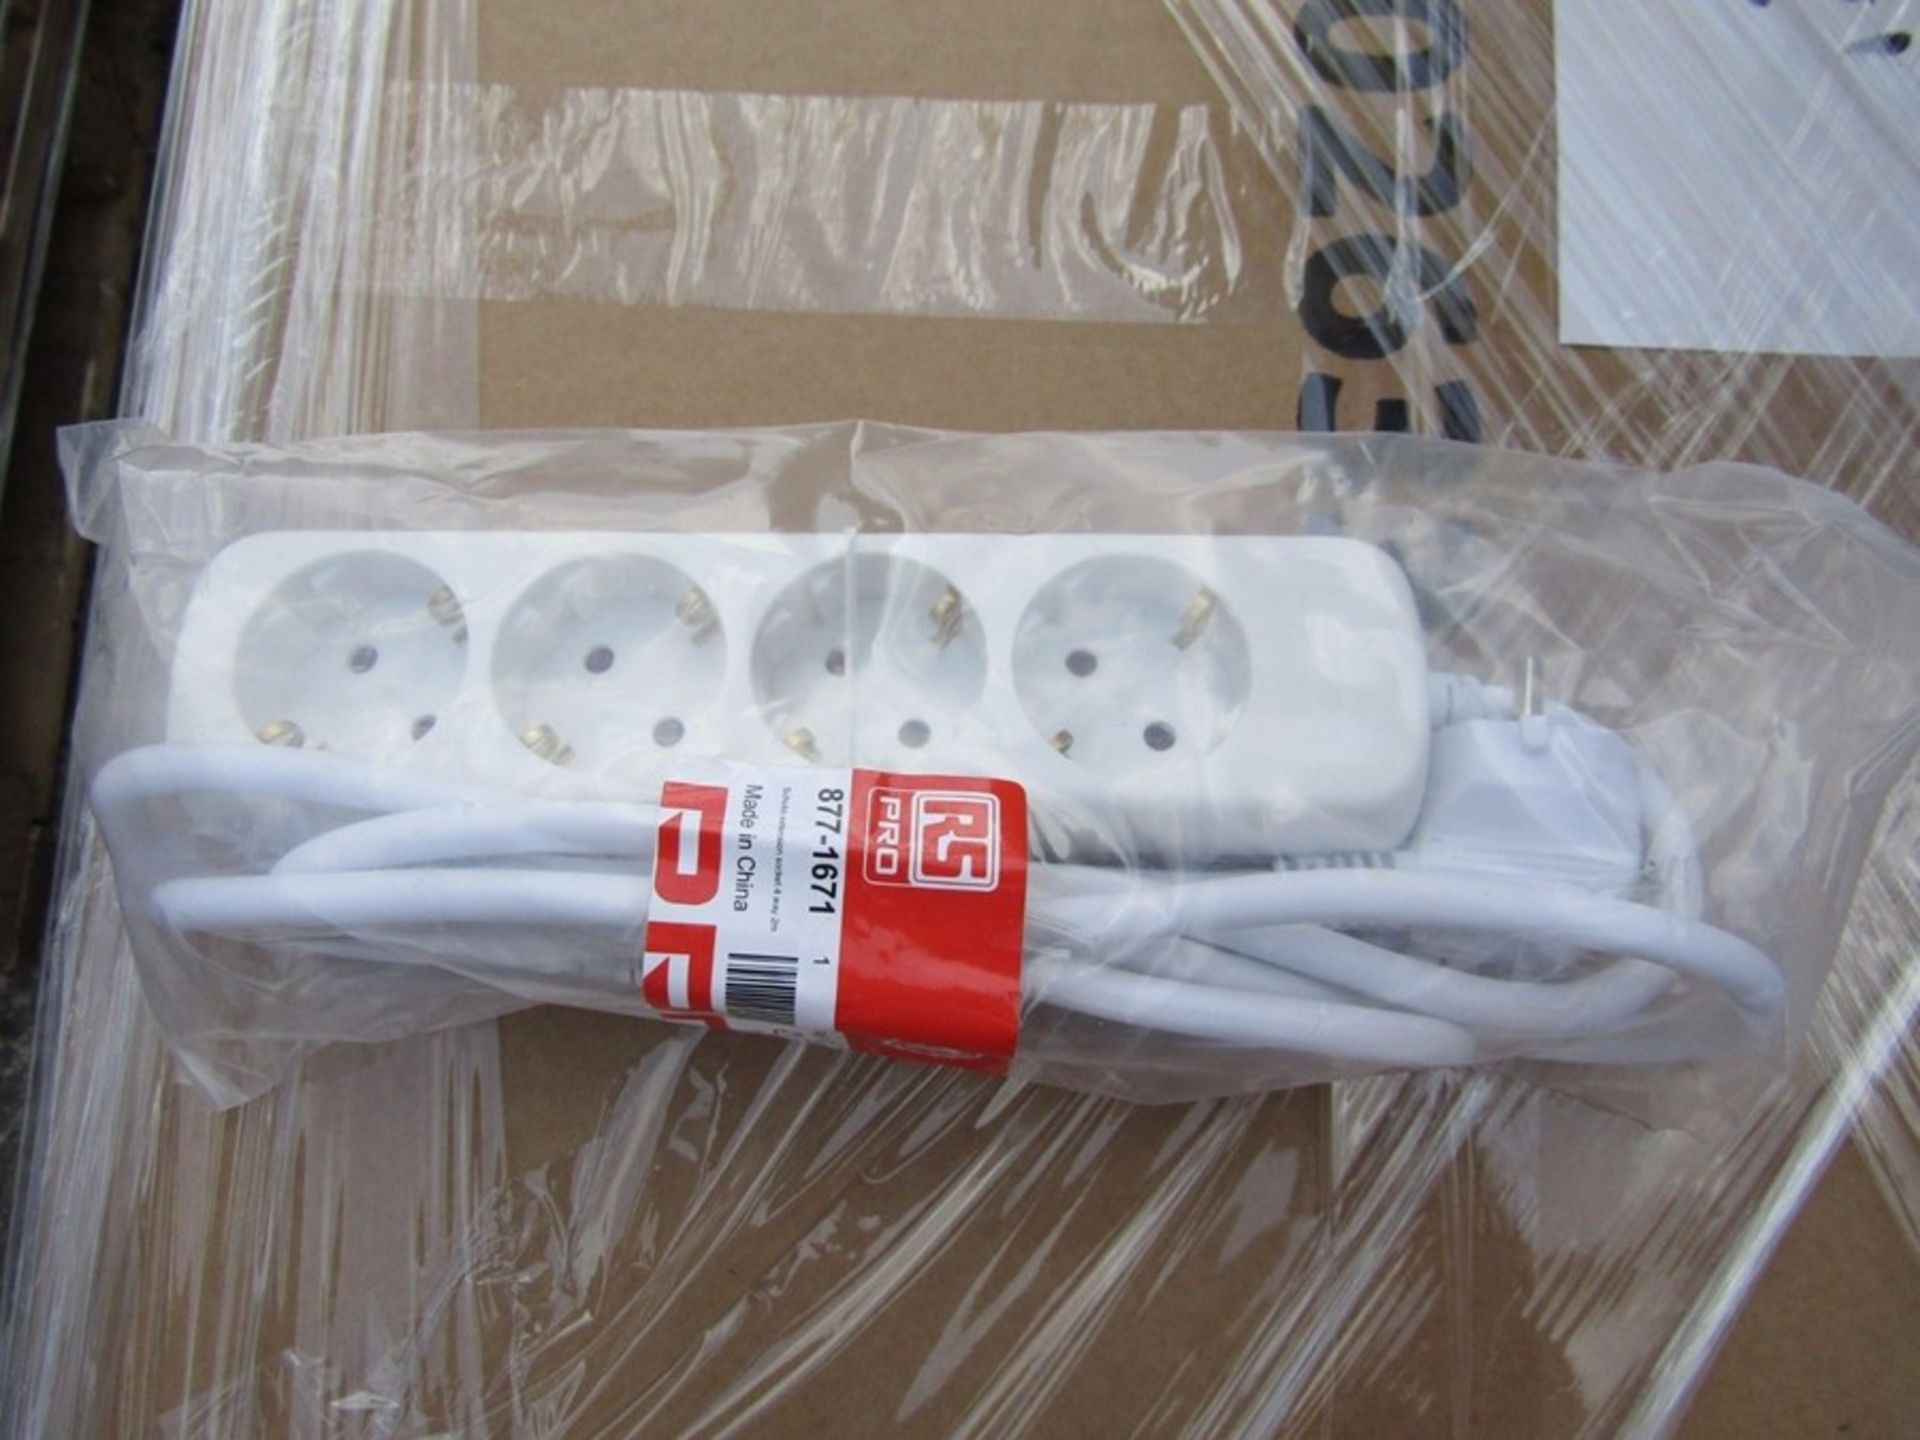 80 x Type F German 4 Way Switched Extension Sockets with CEE7/7 Plug